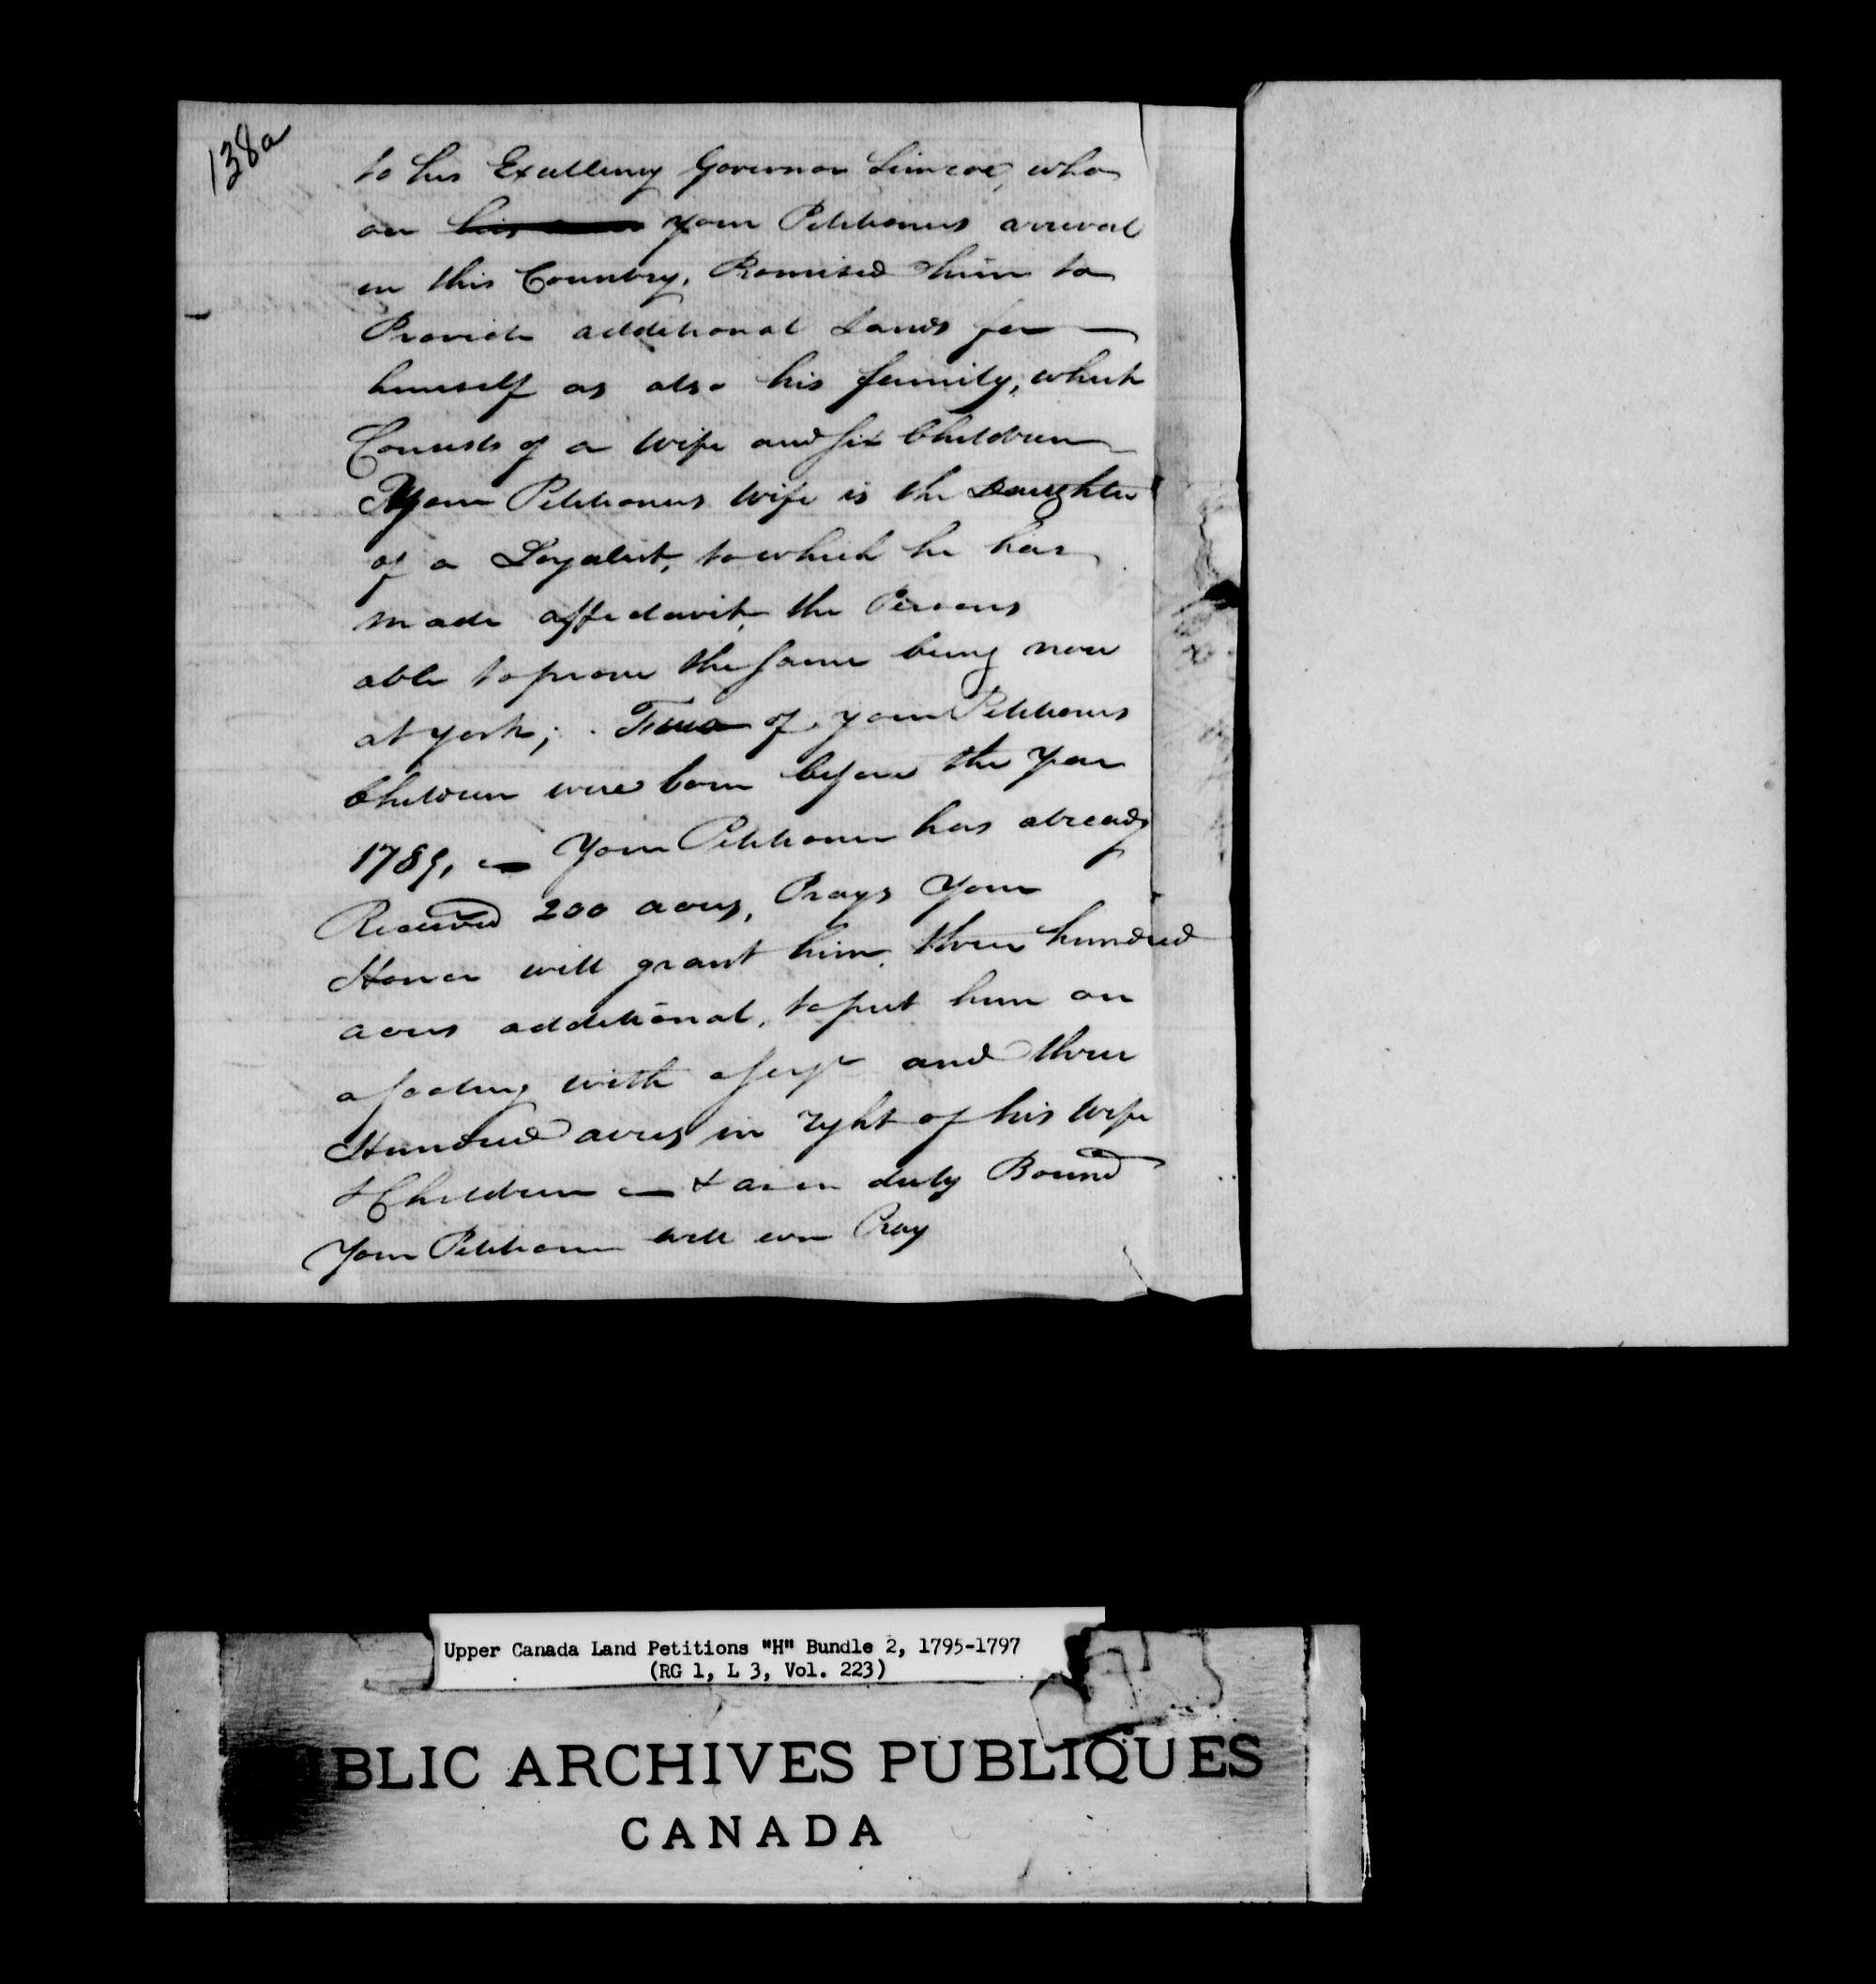 Title: Upper Canada Land Petitions (1763-1865) - Mikan Number: 205131 - Microform: c-2043